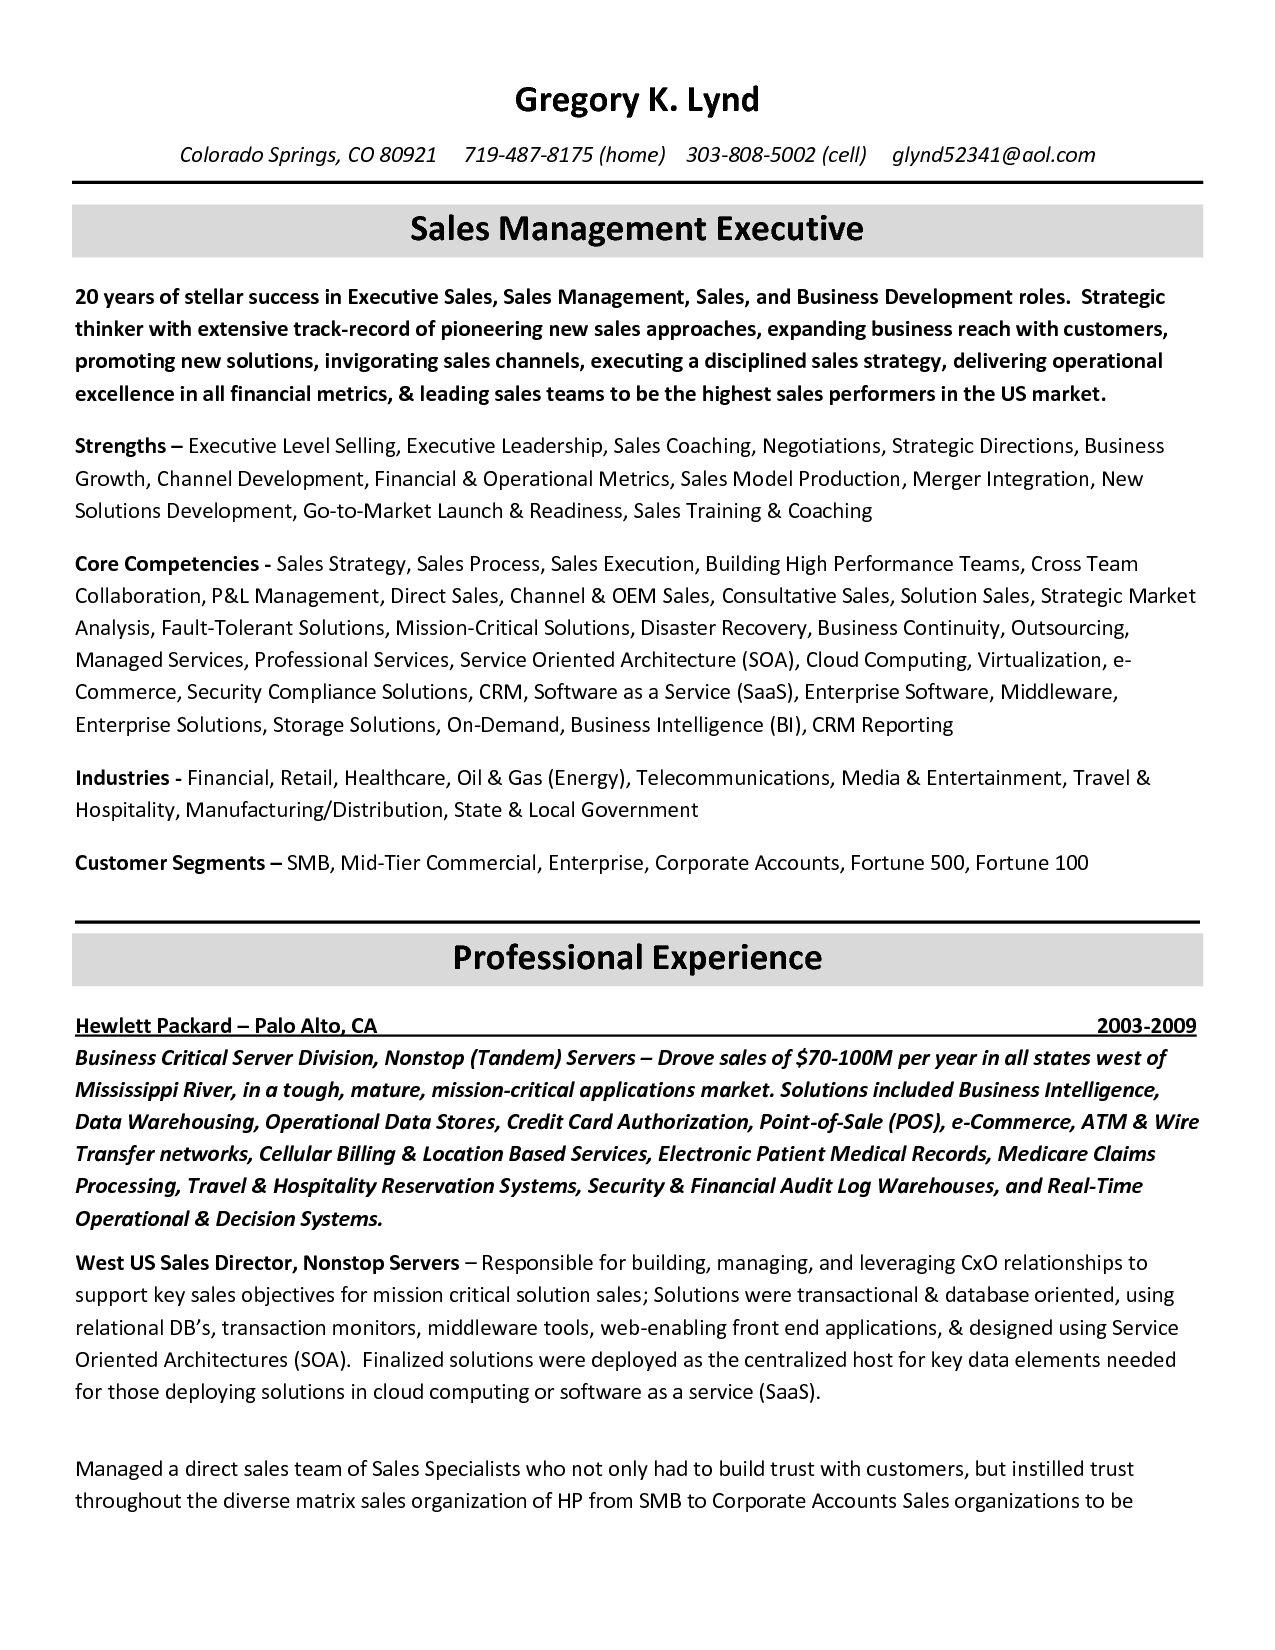 Resume Core Competencies inside sizing 1275 X 1650